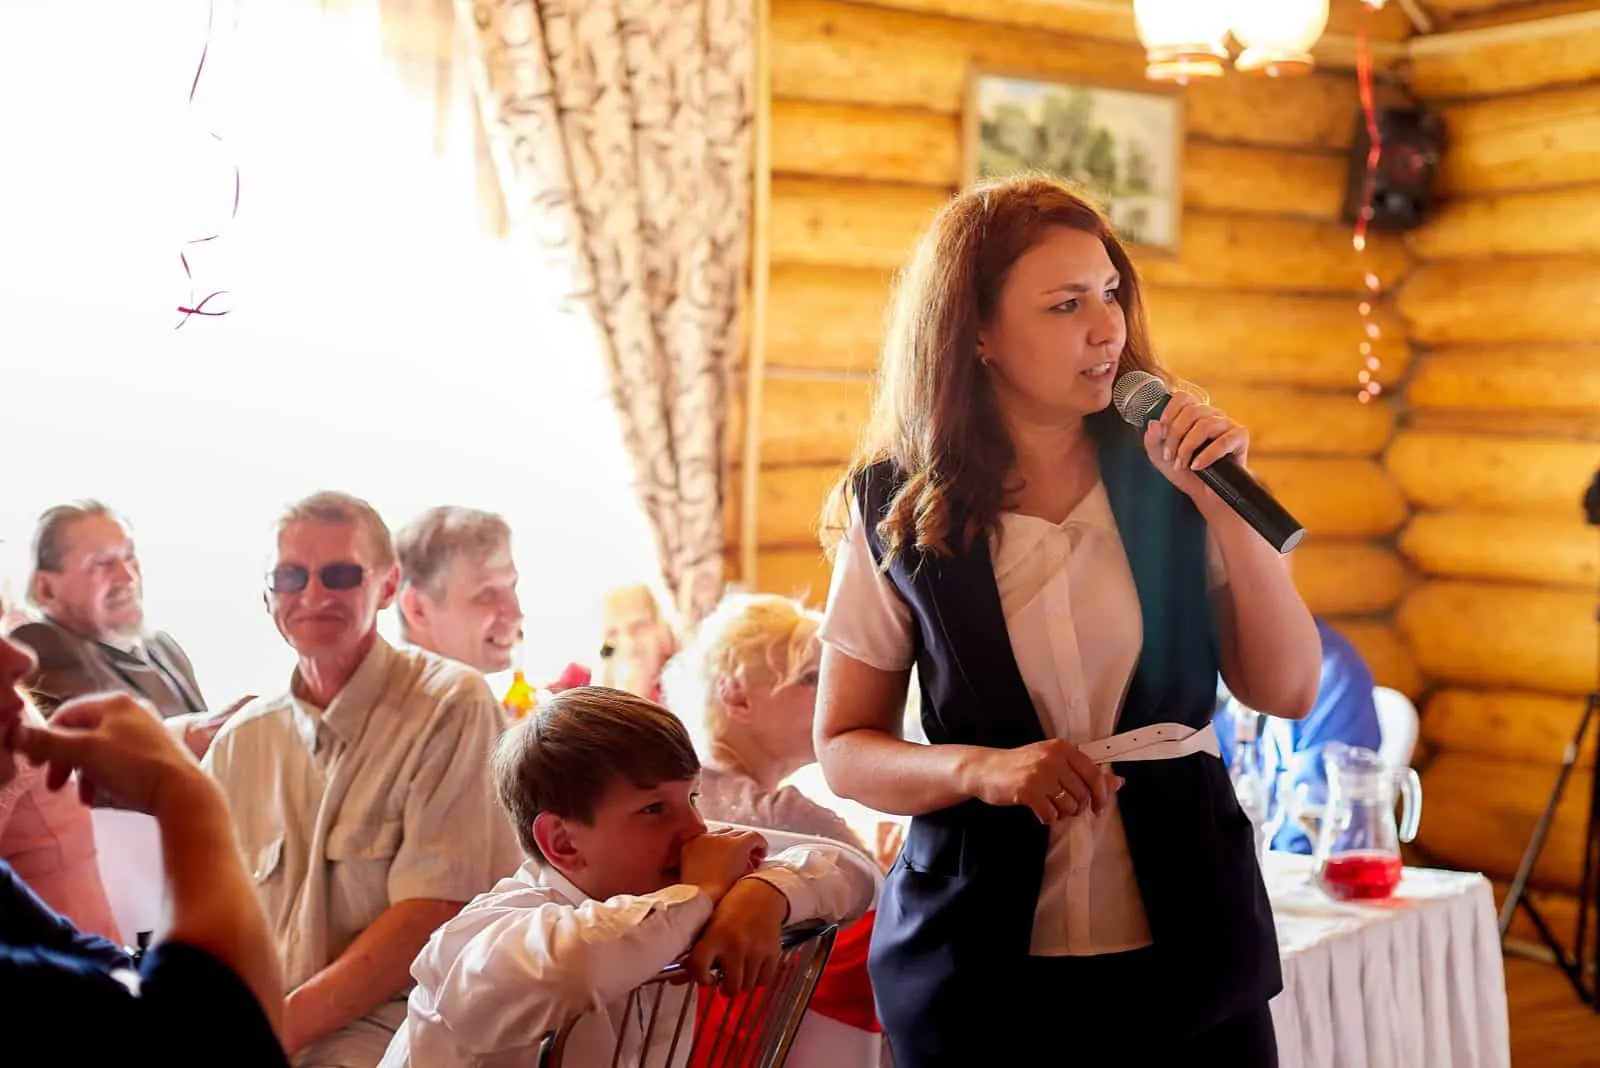 a woman with long brown hair gives a speech at a wedding